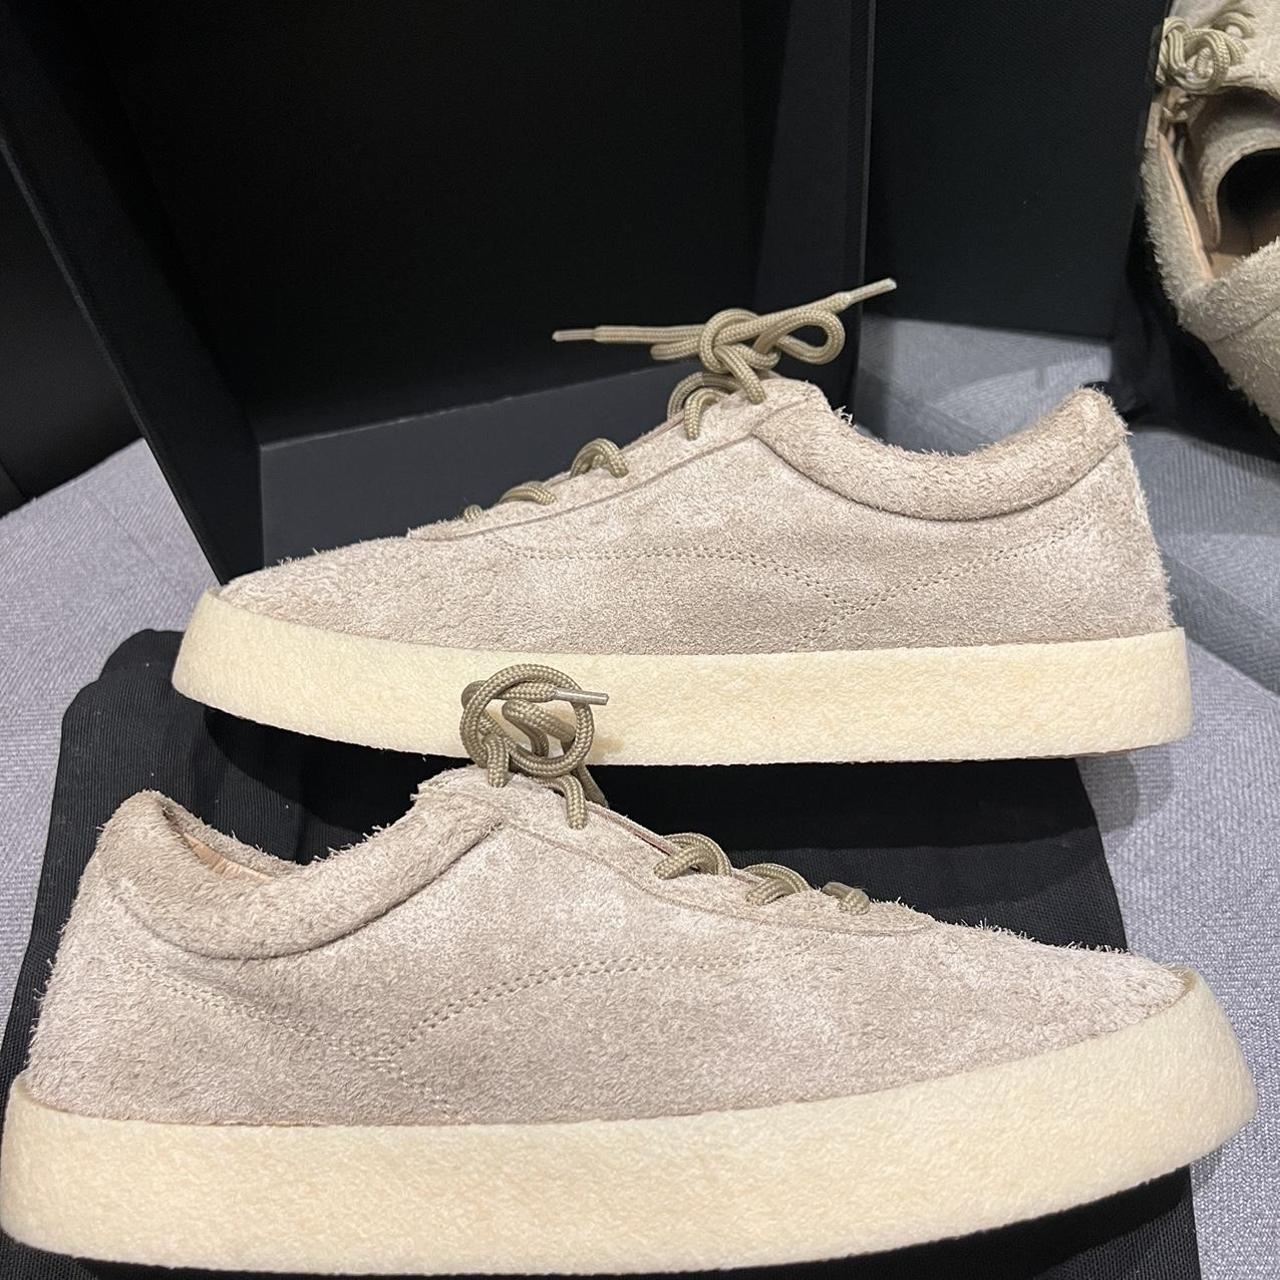 Yeezy season 6 taupe thick shaggy suede crepe